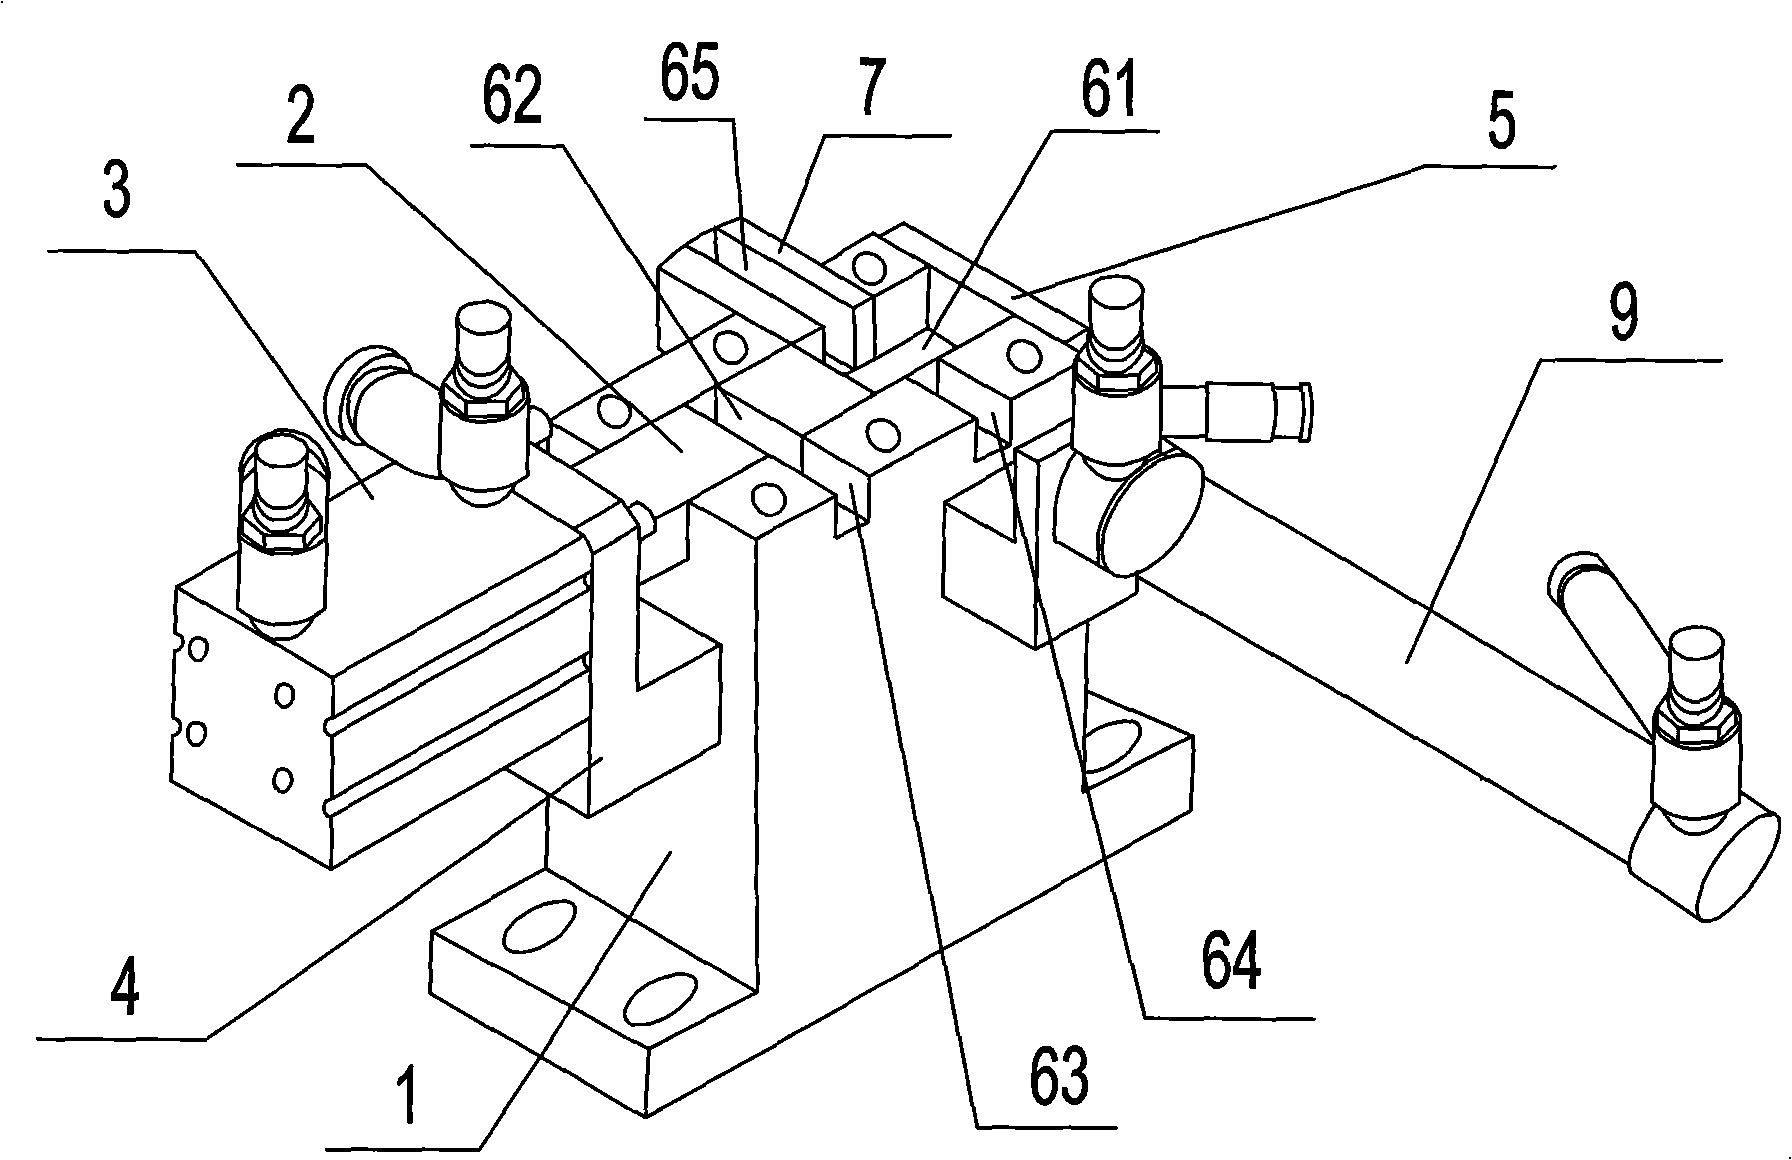 Automatic distributing mechanism of connector posts for wire connecting terminal